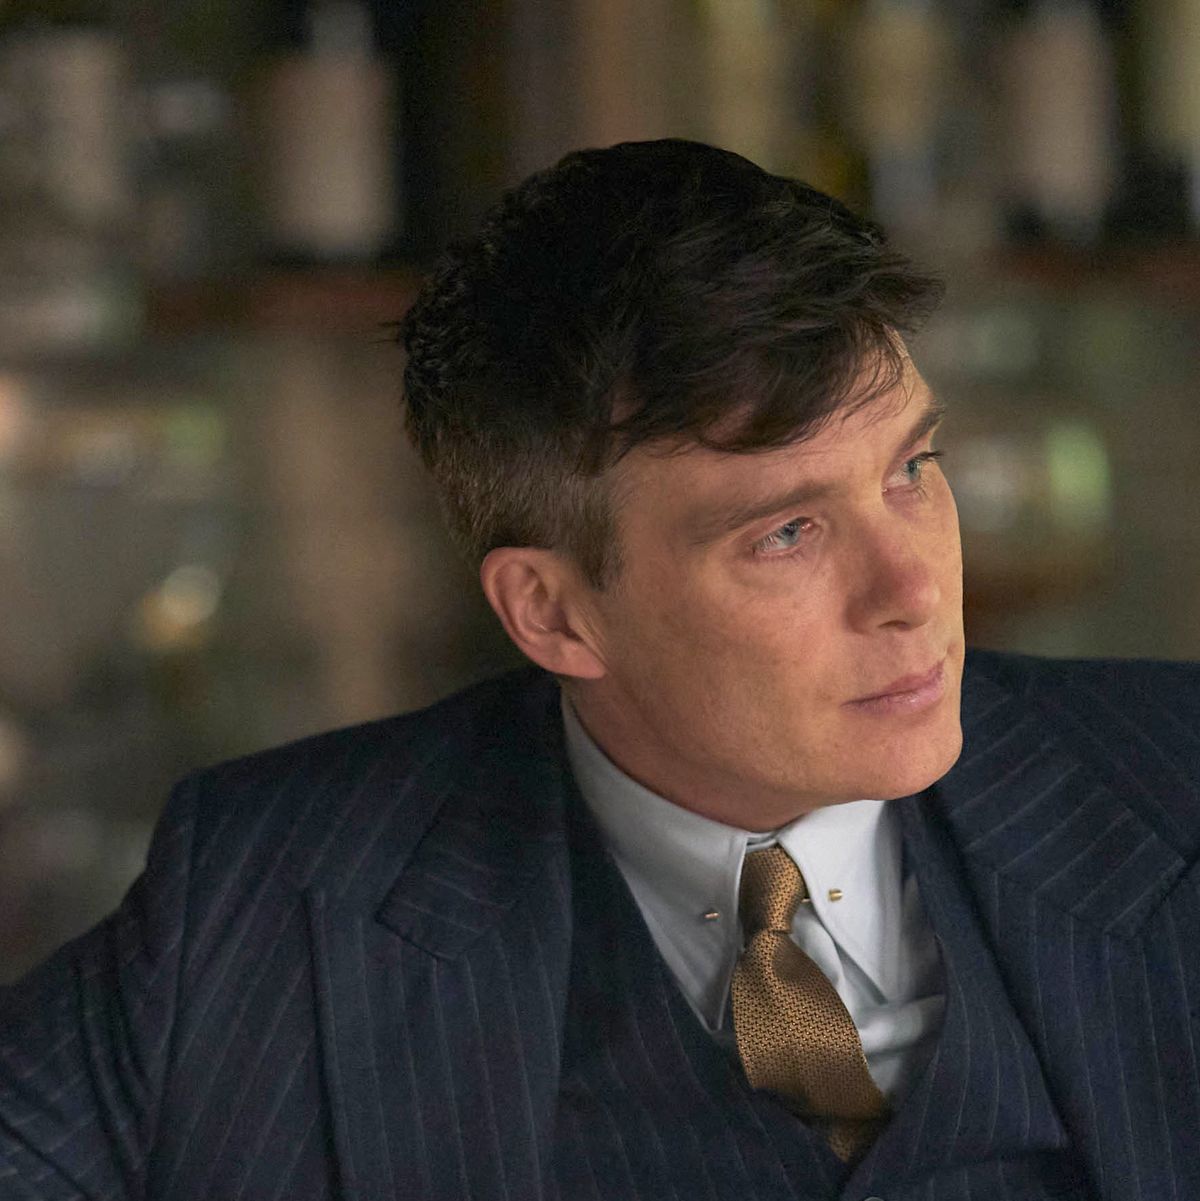 Peaky Blinders: [SPOILER]'s Death Detail Hid A Secret Warning For Tommy